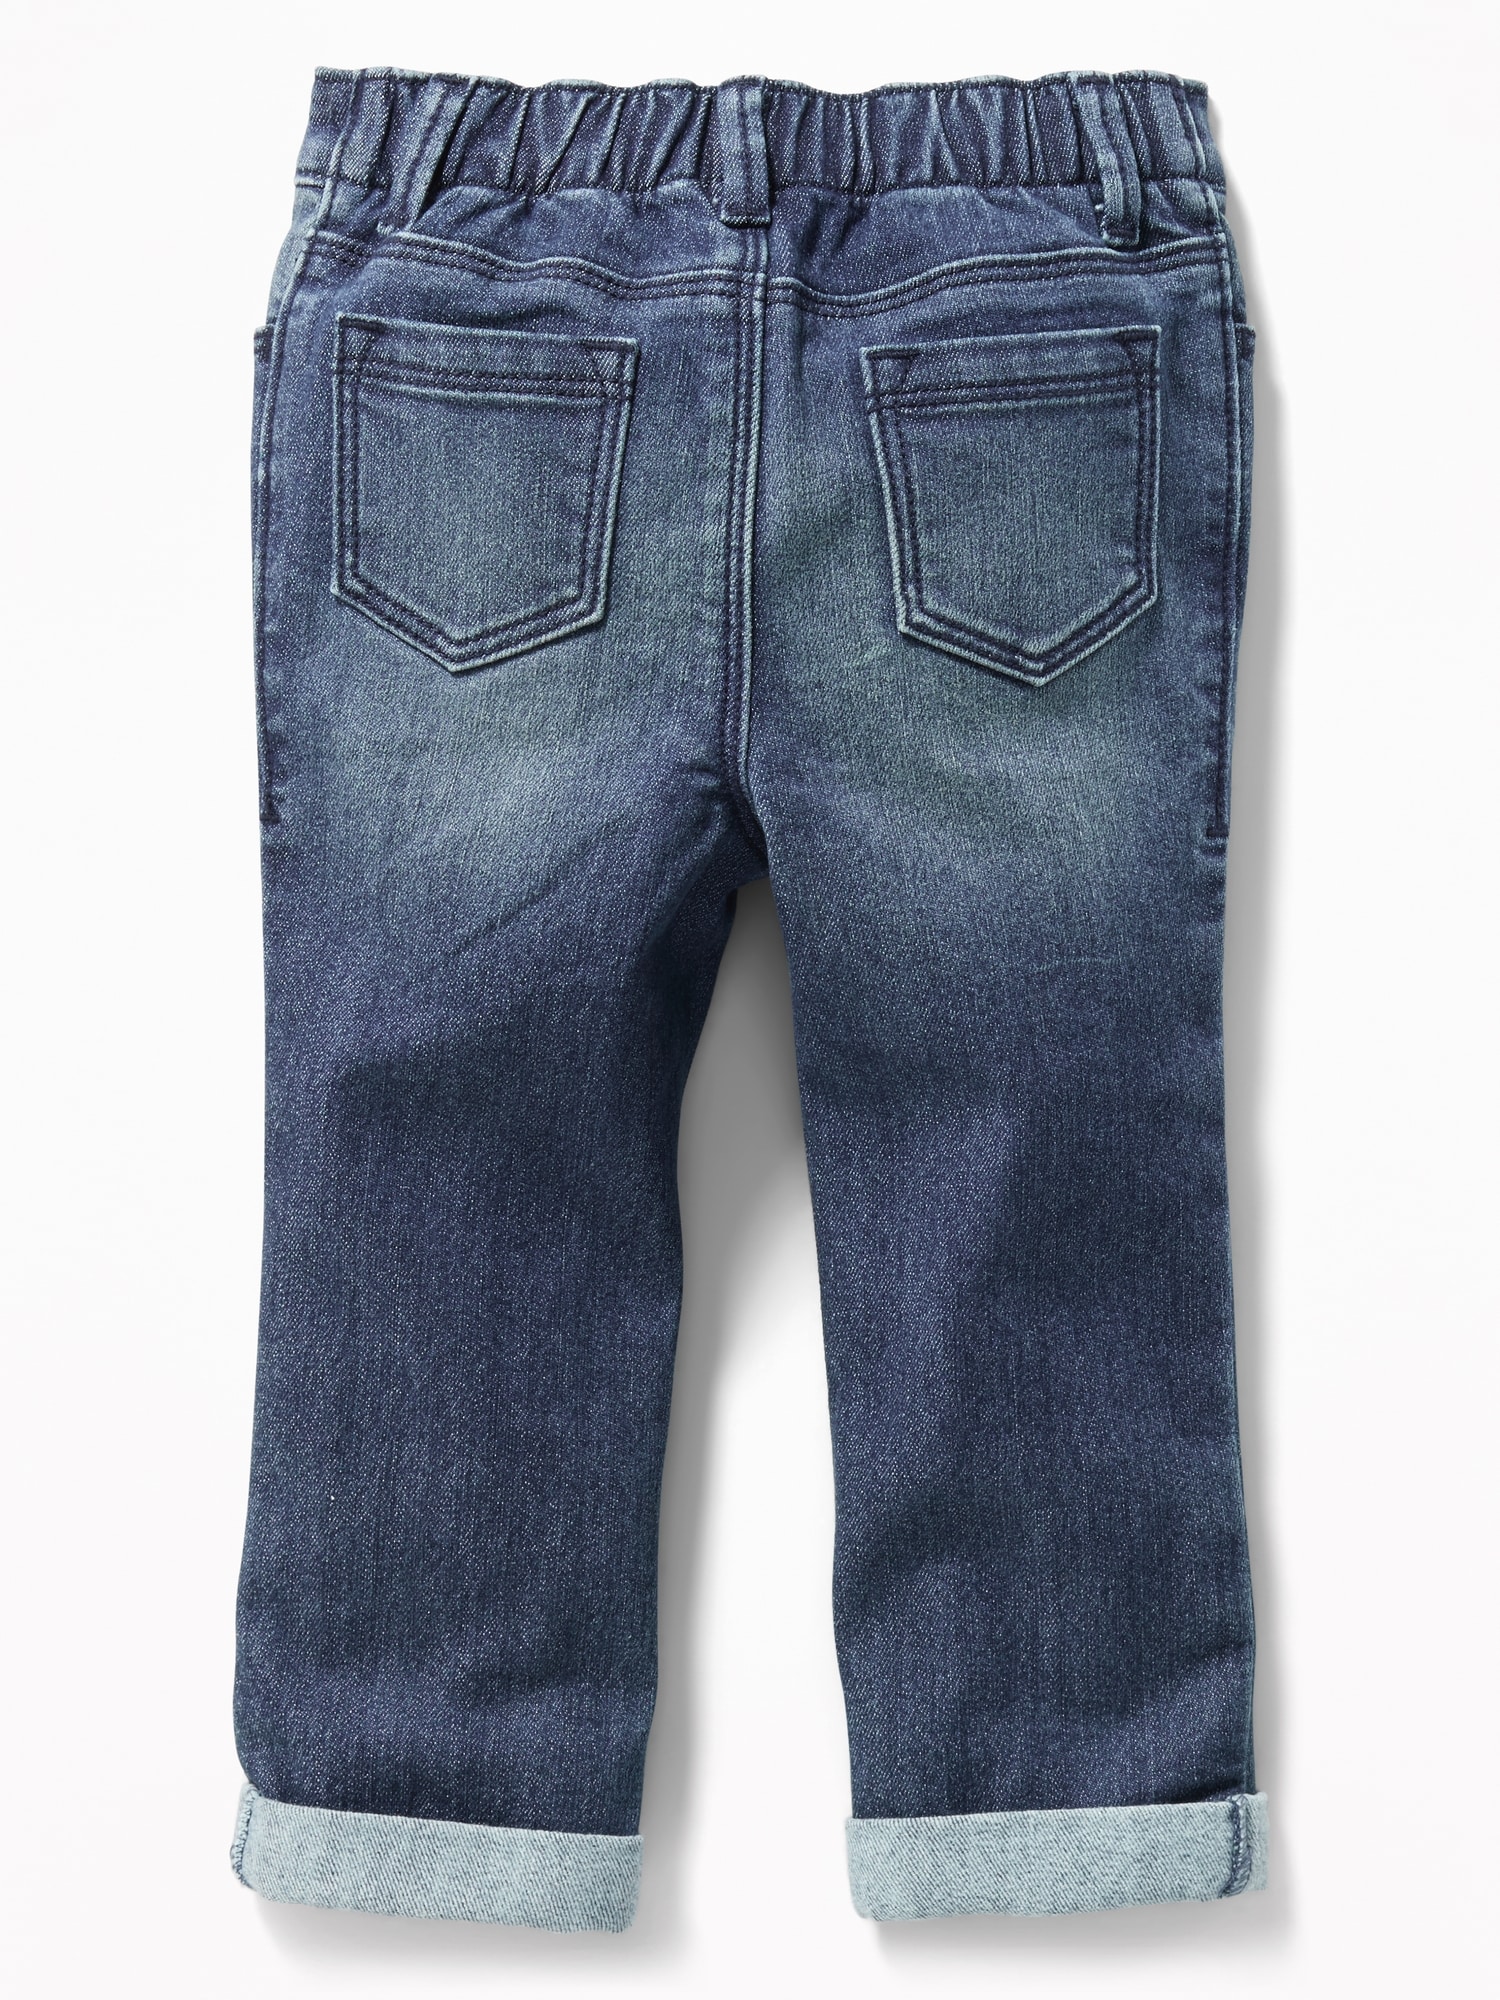 Embroidered Cozy-Lined Jeans for Toddler Girls | Old Navy